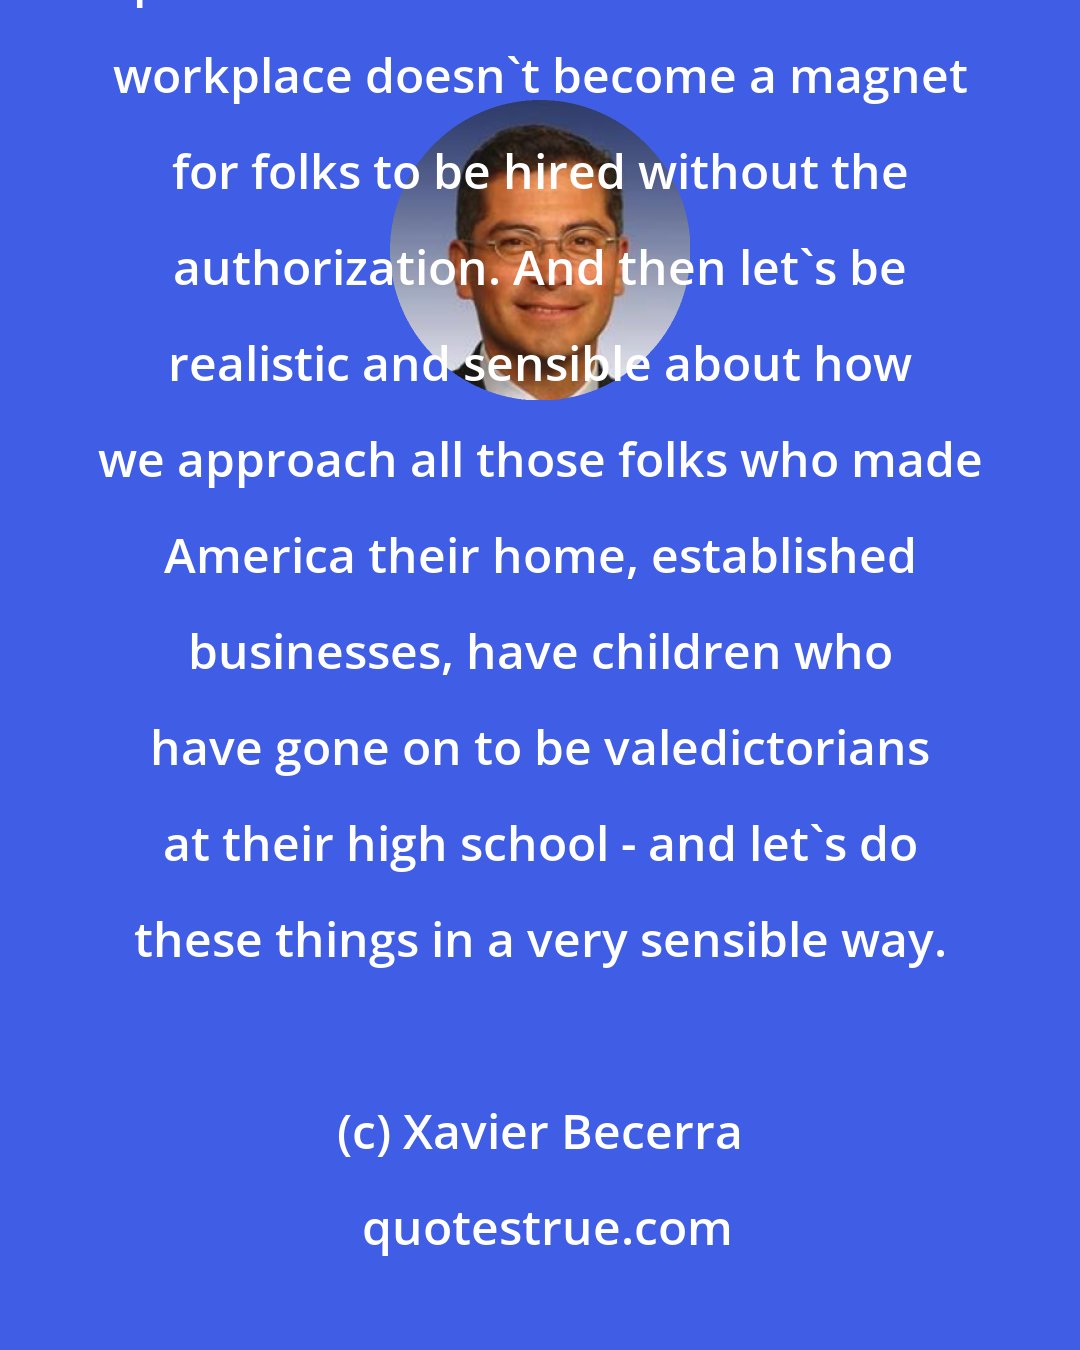 Xavier Becerra: Gotta have safety at our borders. We're a sovereign nation, gotta protect our borders. Make sure the workplace doesn't become a magnet for folks to be hired without the authorization. And then let's be realistic and sensible about how we approach all those folks who made America their home, established businesses, have children who have gone on to be valedictorians at their high school - and let's do these things in a very sensible way.